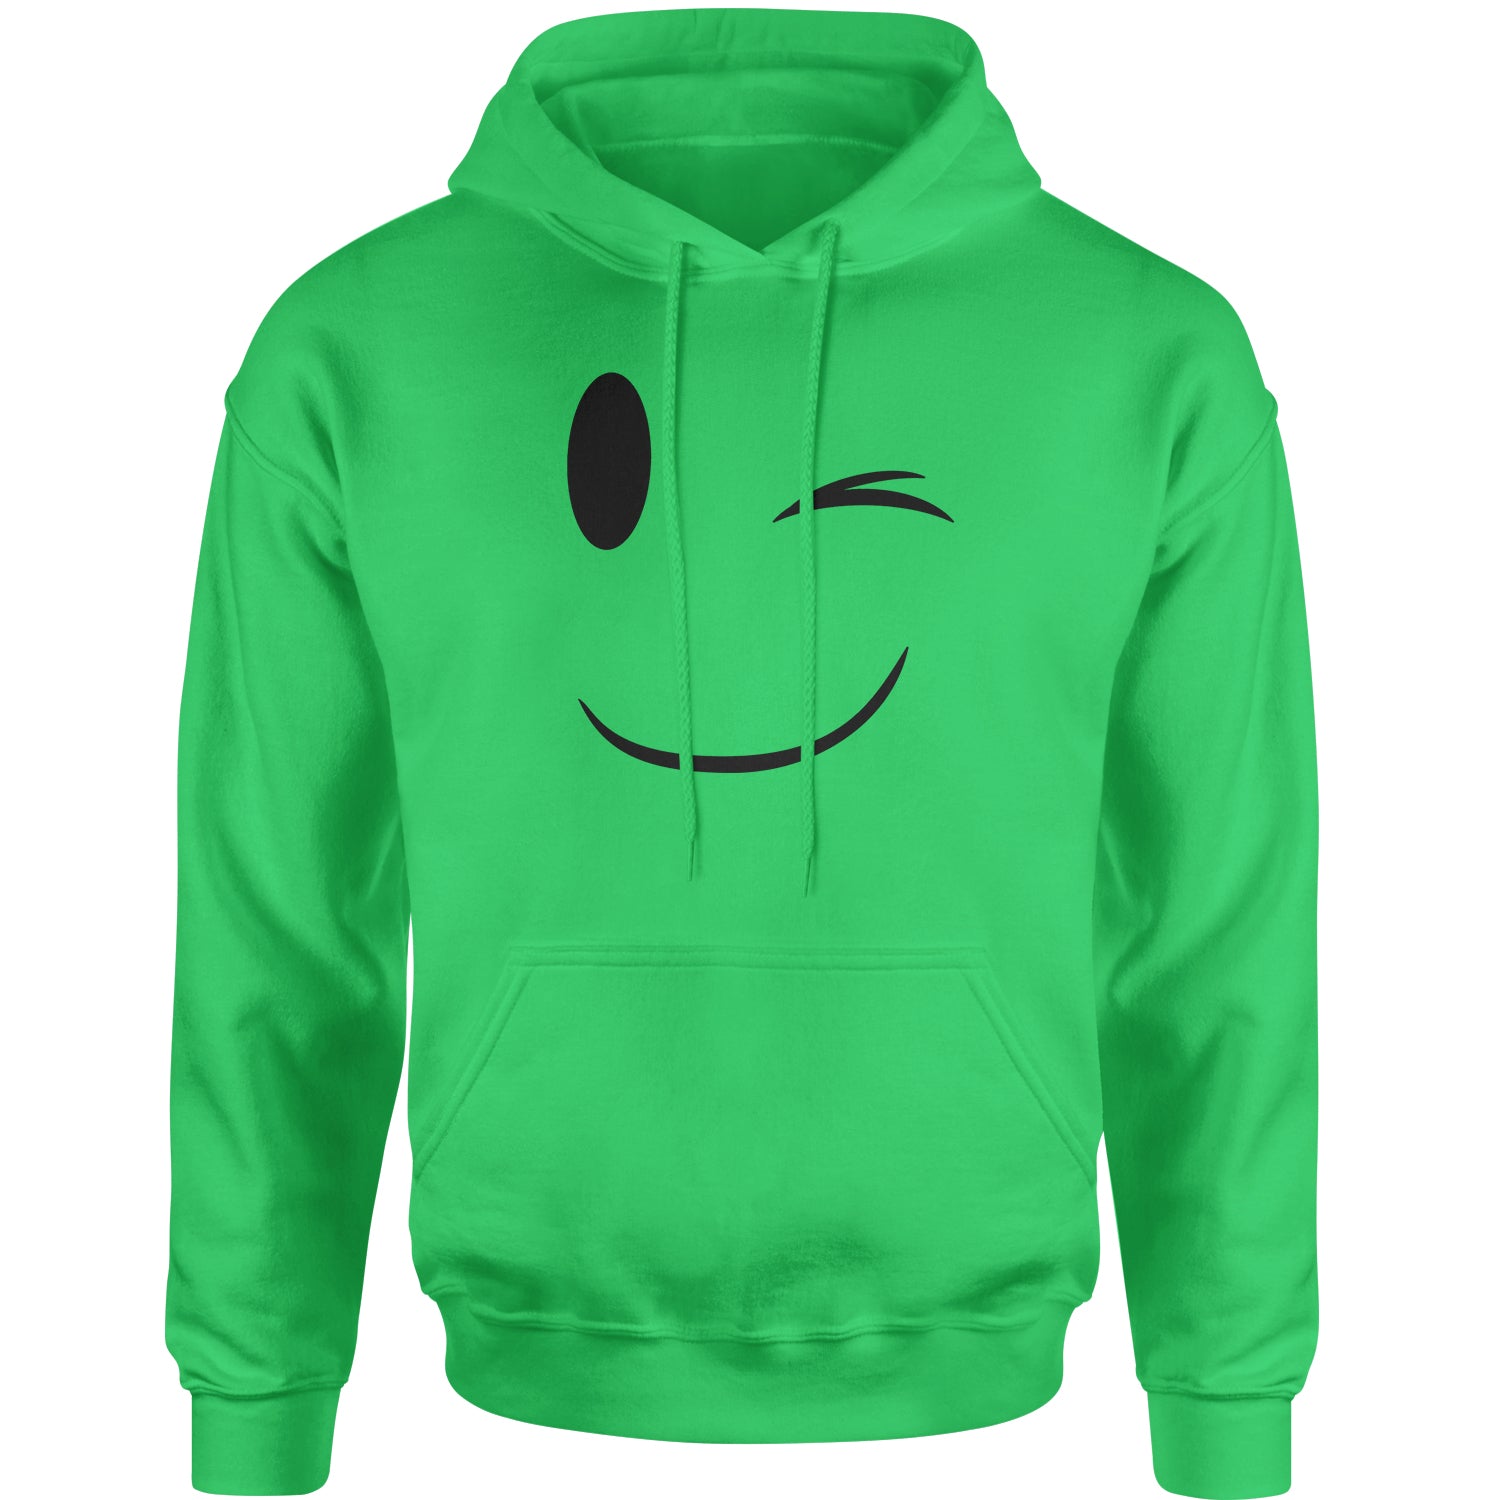 Emoticon Winking Smile Face Adult Hoodie Sweatshirt cosplay, costume, dress, emoji, emote, face, halloween, smiley, up, yellow by Expression Tees